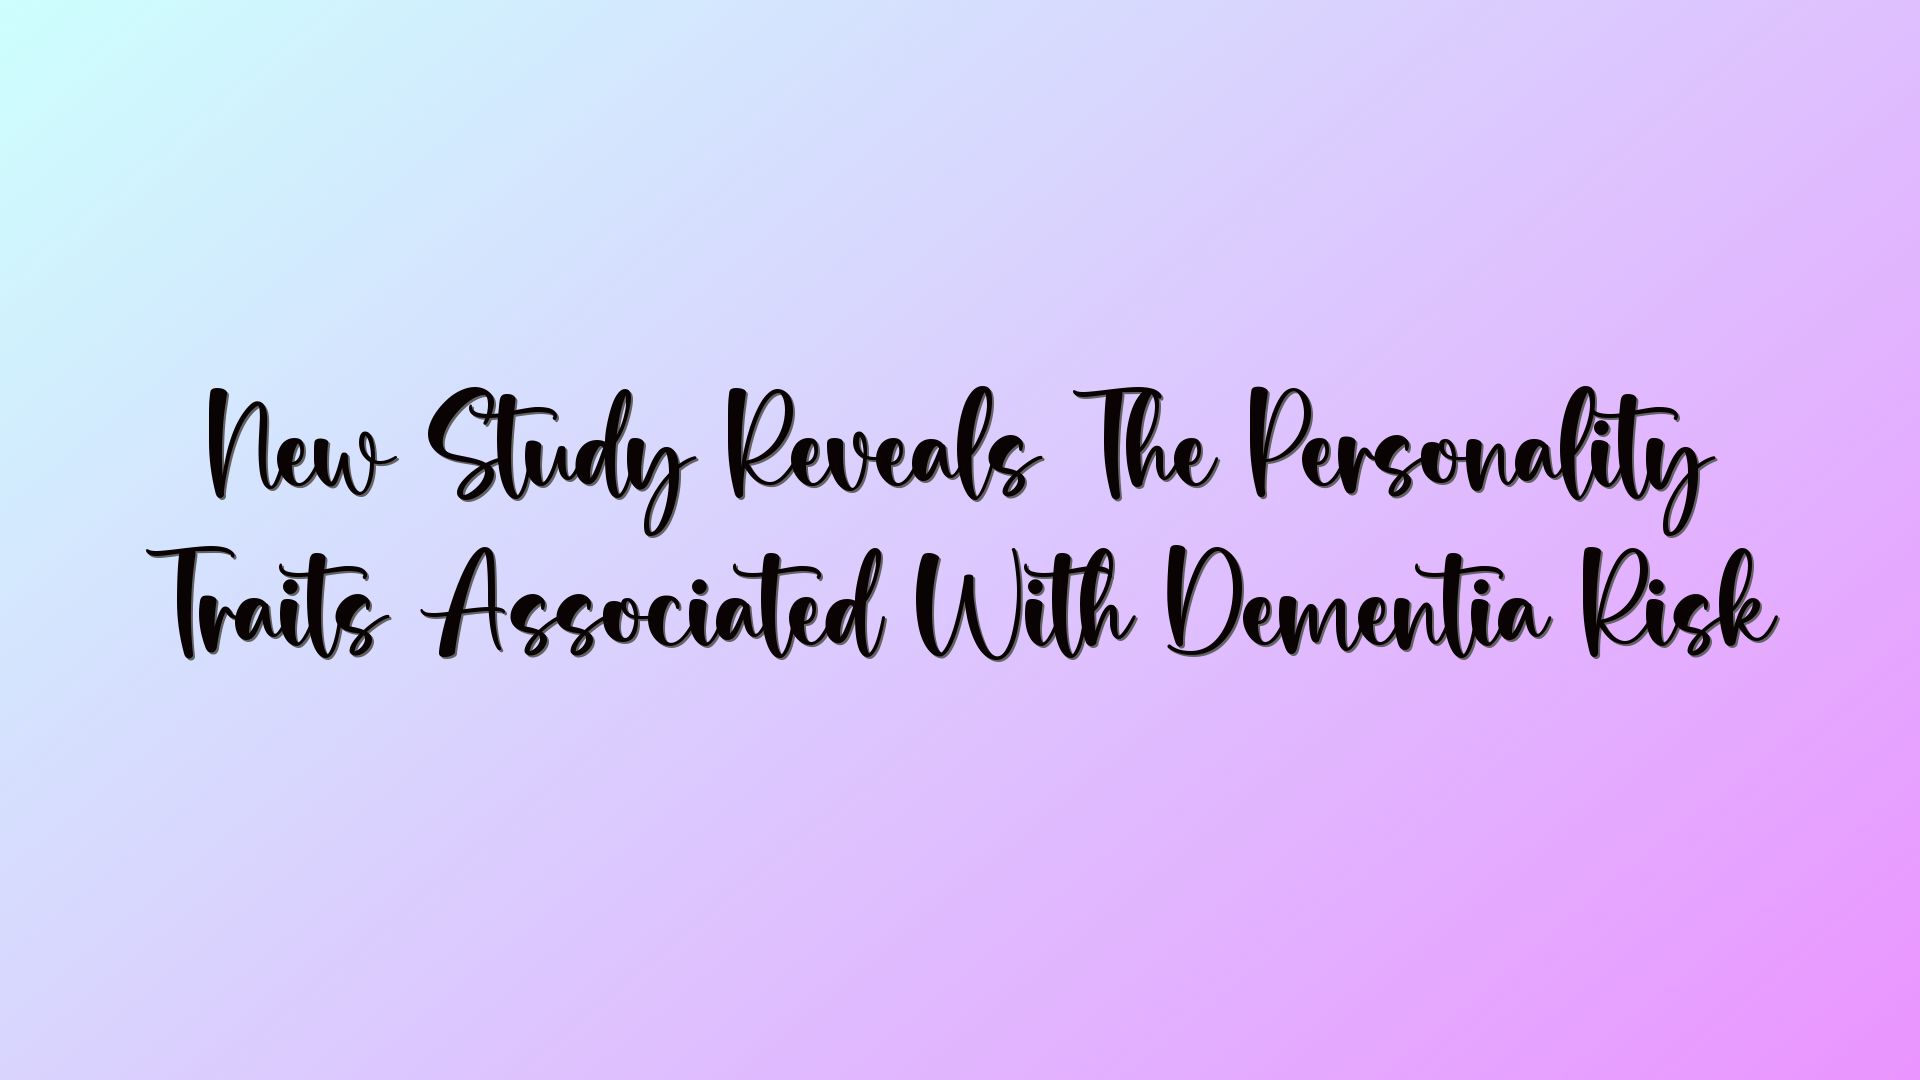 New Study Reveals The Personality Traits Associated With Dementia Risk